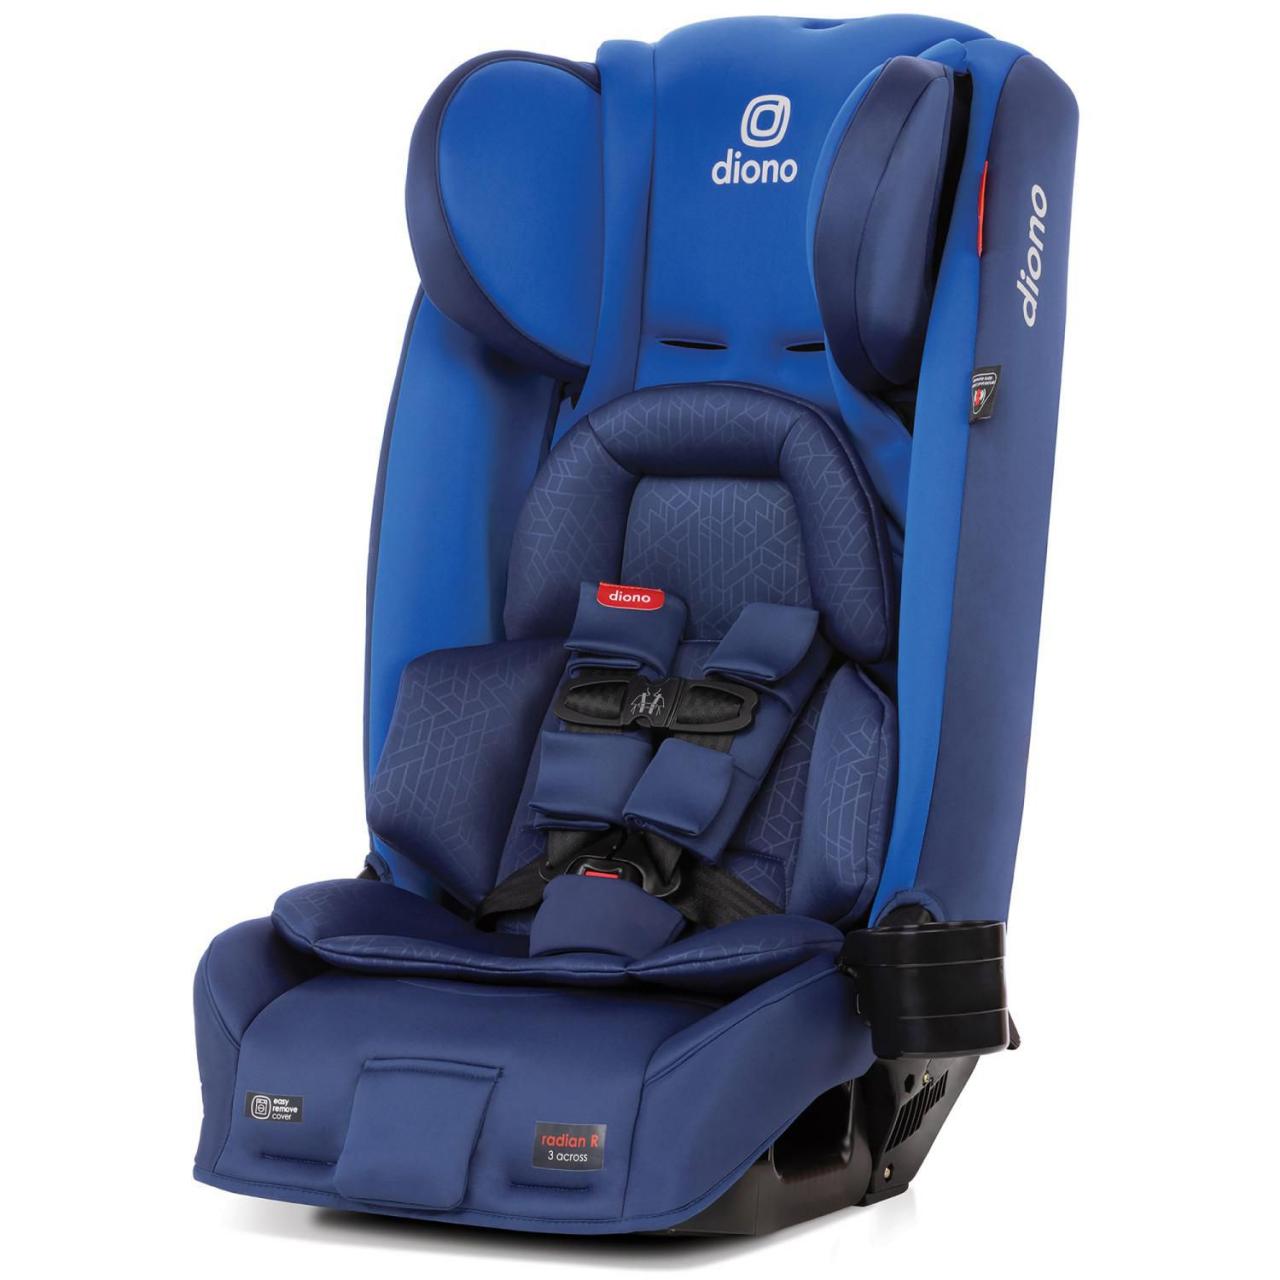 Diono Radian 3 RXT Latch All in One Convertible Car Seat - Gray Dark Free  Shipping - No Tax